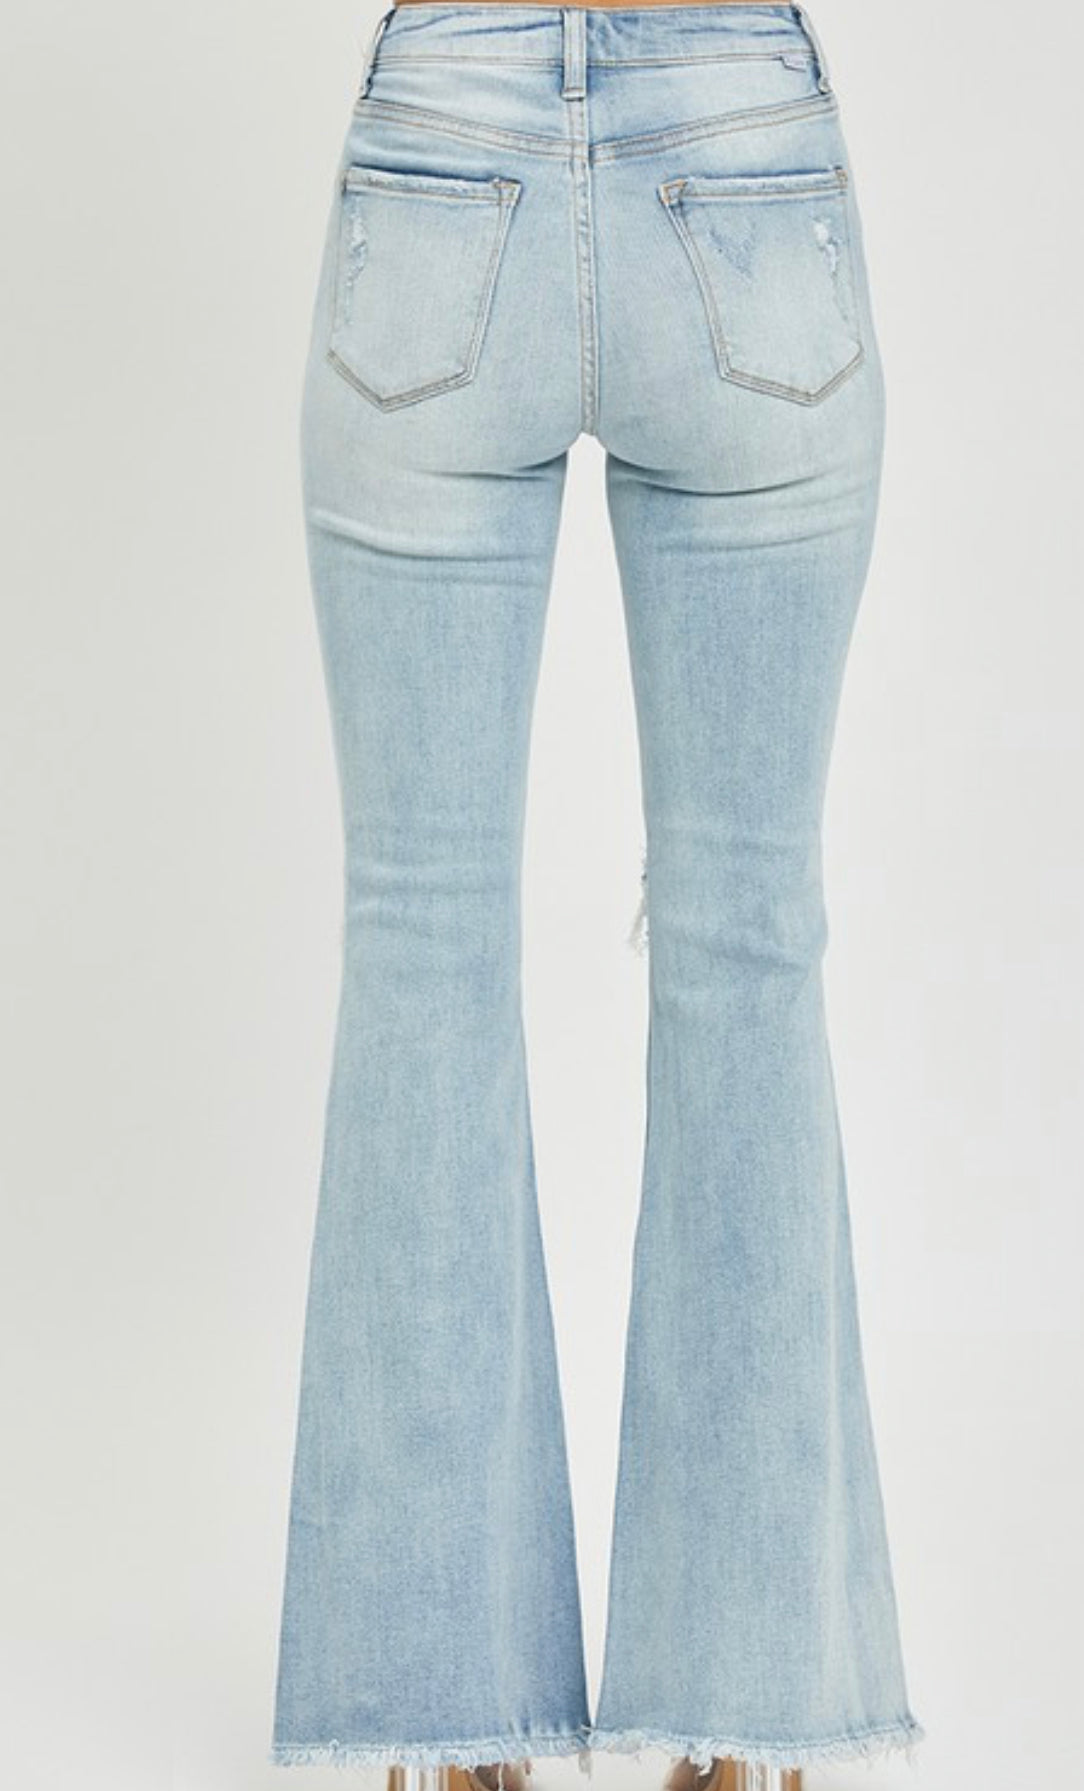 High Rise Distressed Light Wash Flare Jean